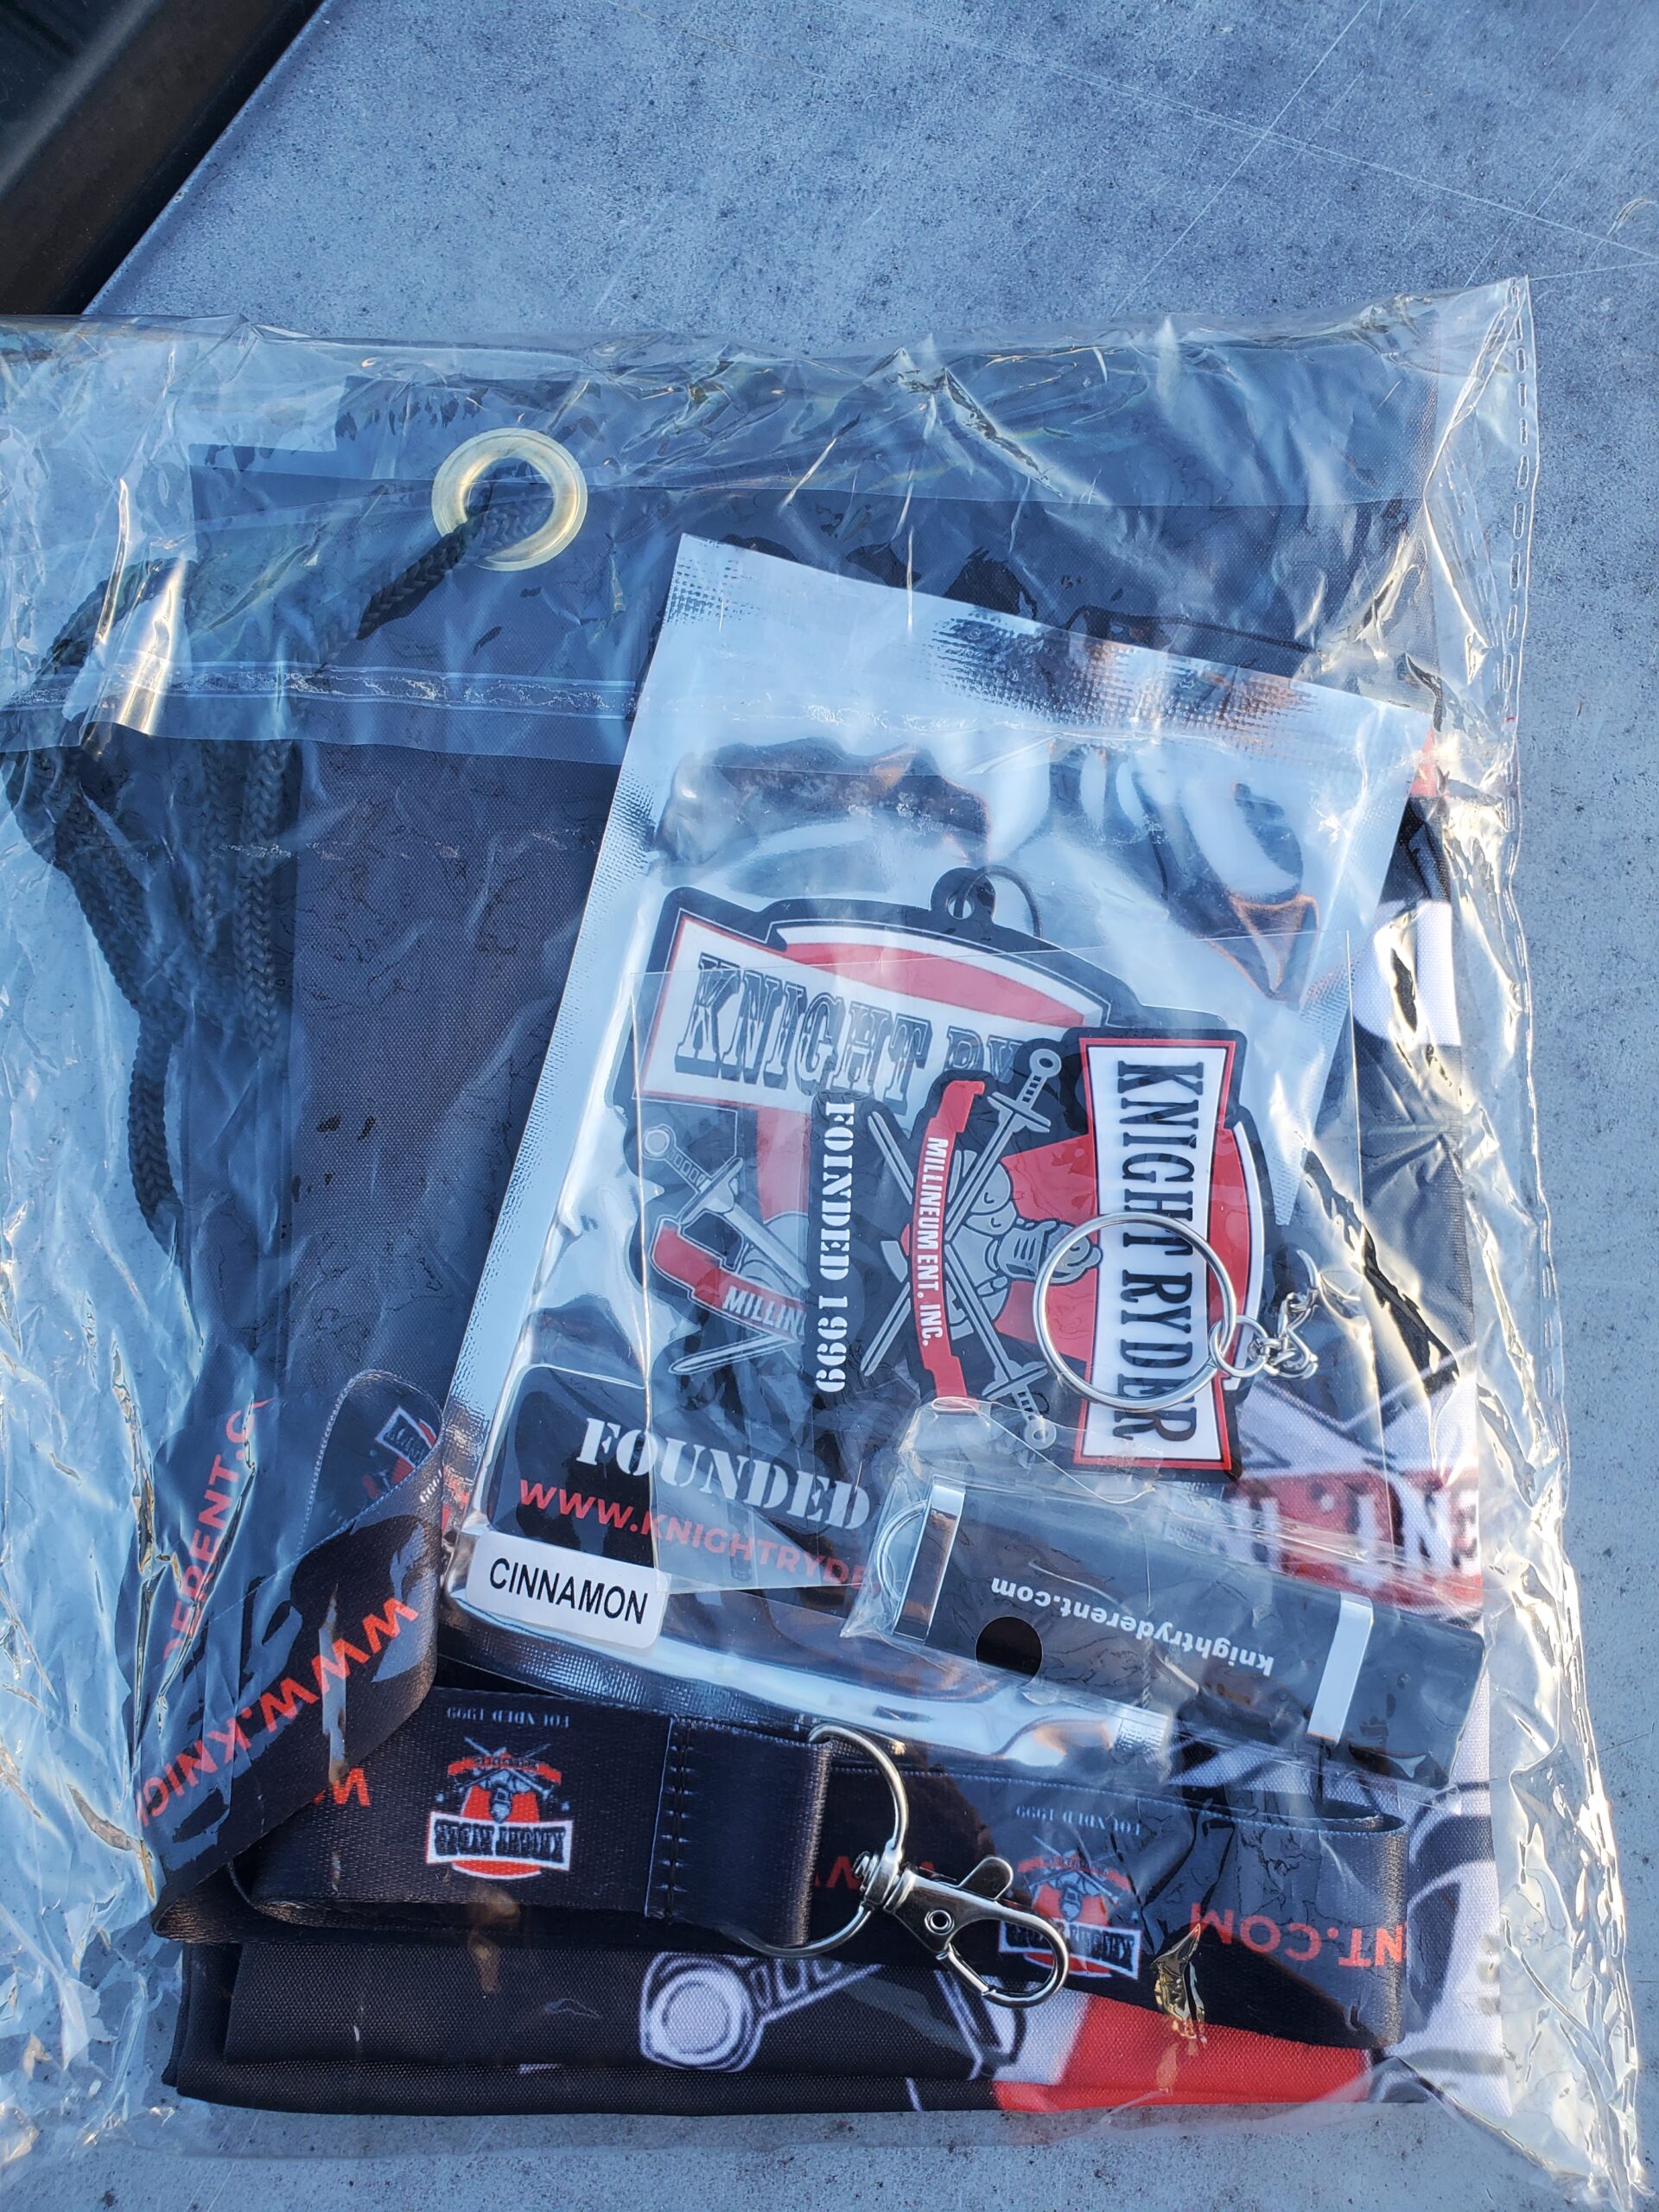 A bag of cigarettes and other items on the ground.